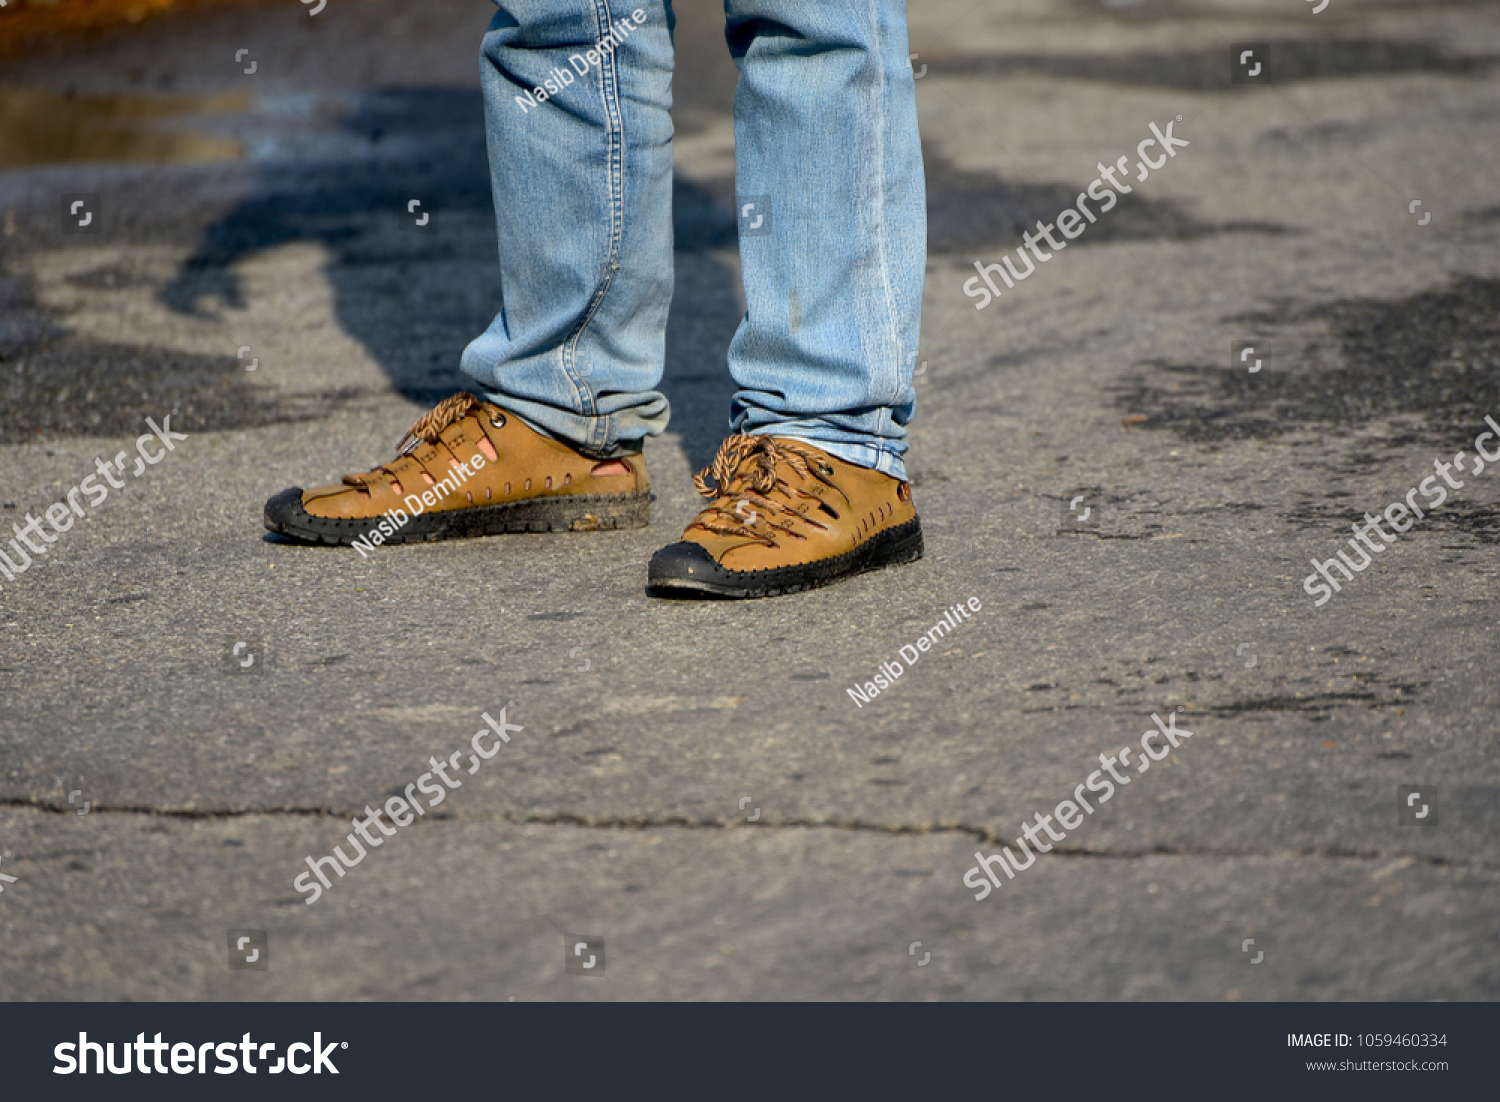 Man standing on a road wearing stylish shoe & jeans wears isolated unique stock photo #1059460334